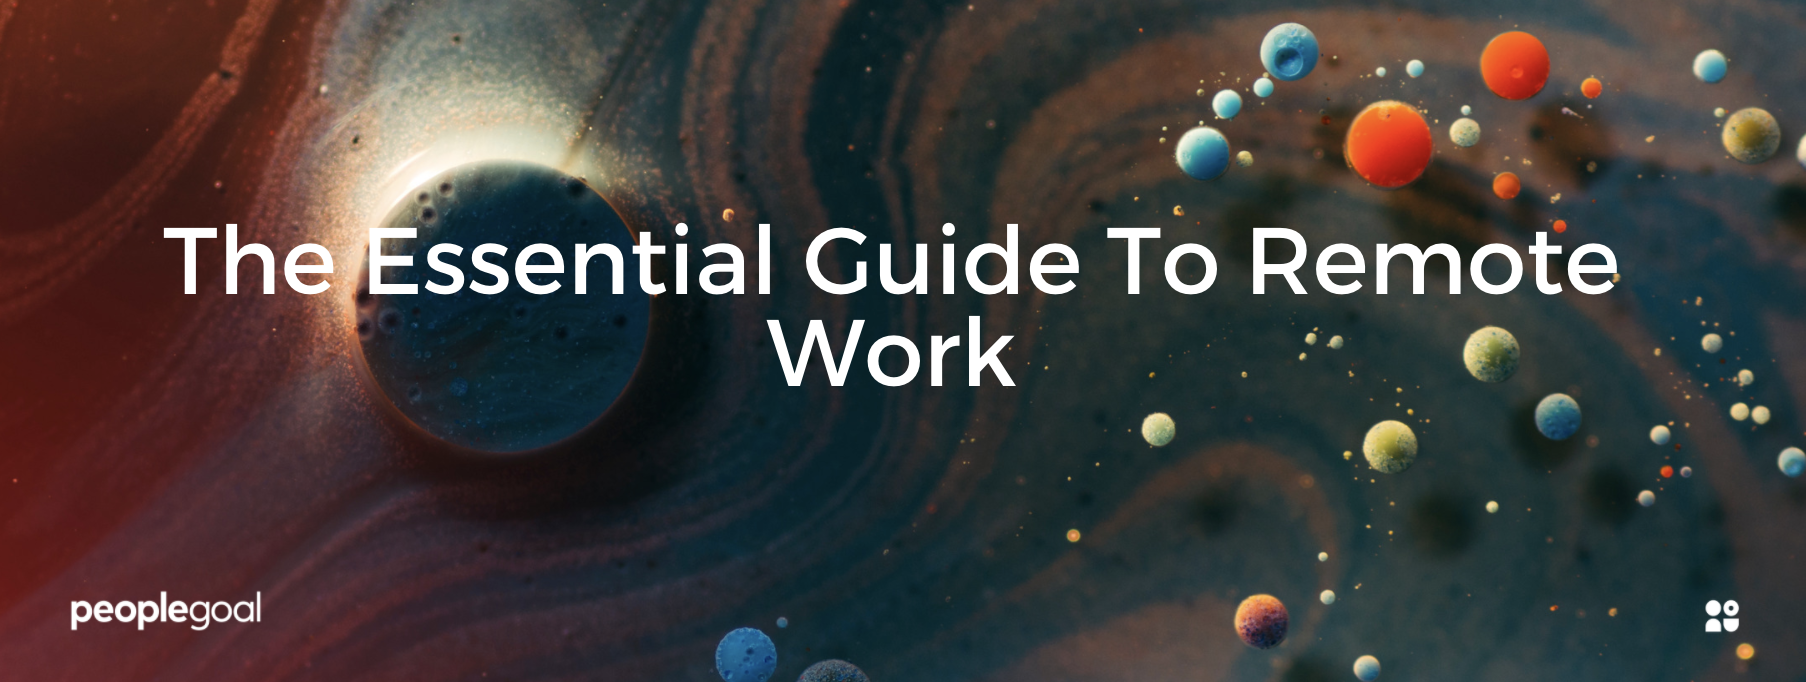 Our remote work guide explains all aspects of remote work and highlights processes that can support the workforce and enable employees to do their best work.